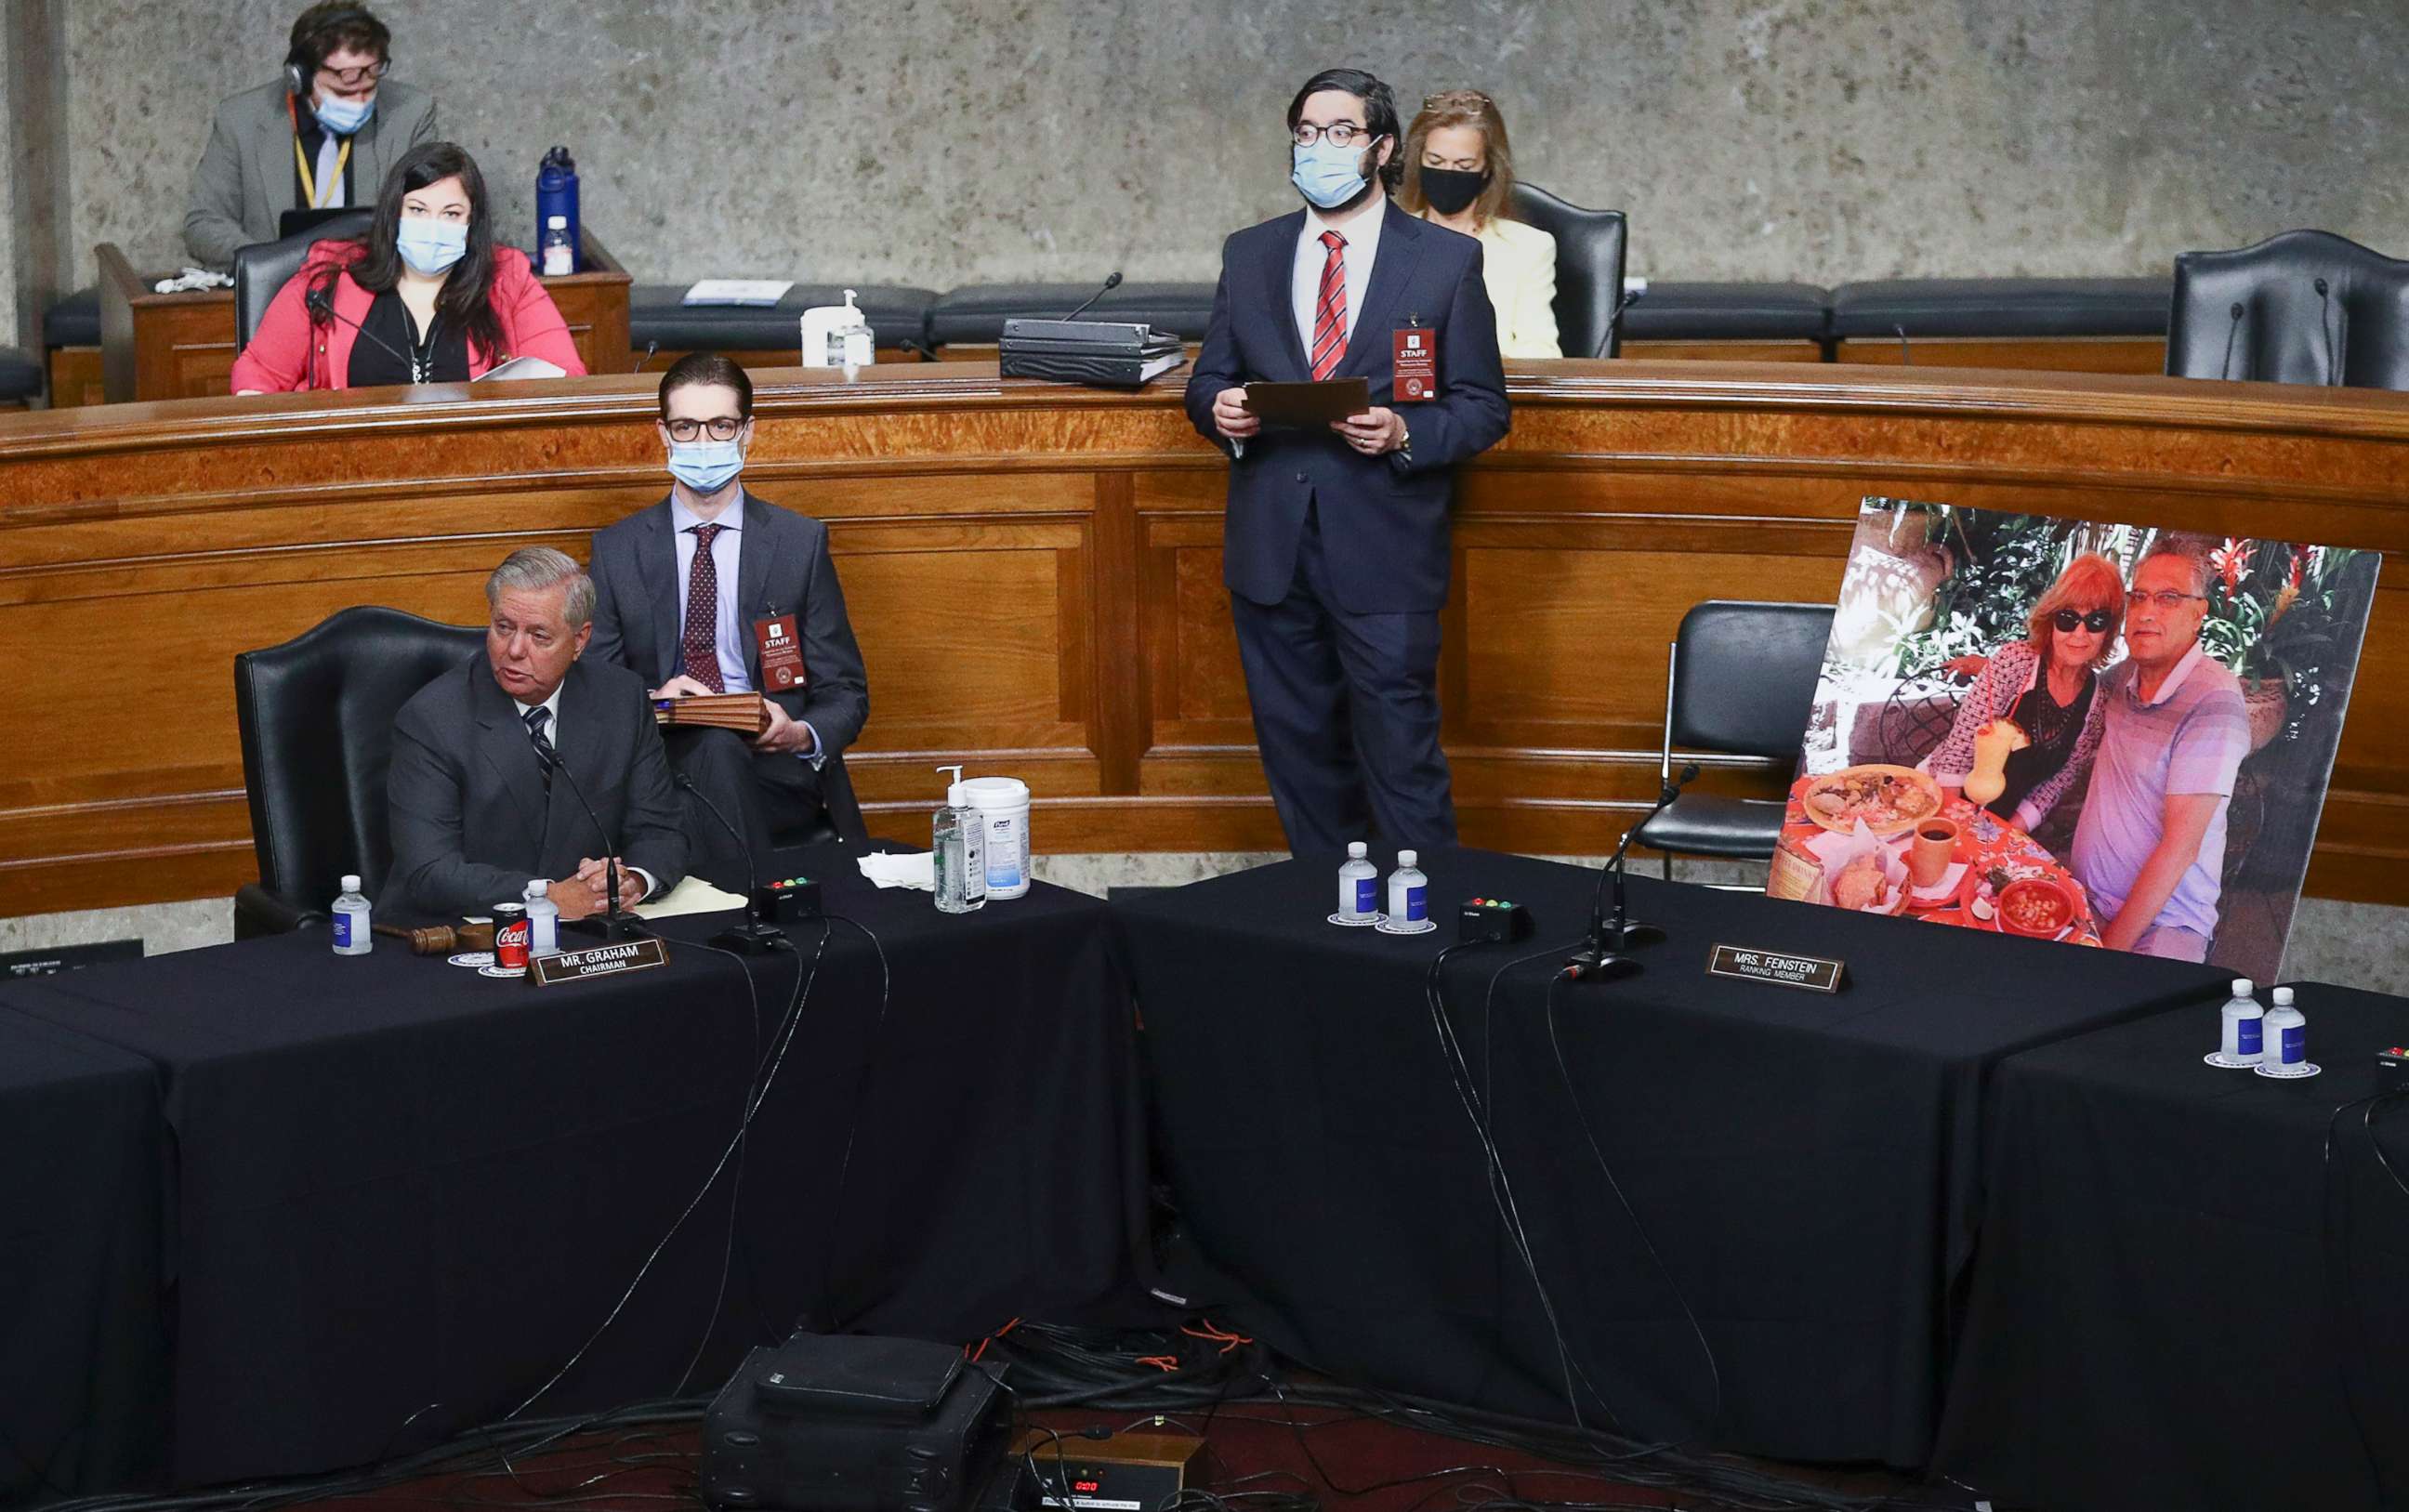 PHOTO: Senate Judiciary Committee Chairman Sen. Lindsey Graham, presides next to an image of people who've been helped by the Affordable Care Act, occupying the seat of Sen. Dianne Feinstein, during the Senate Judiciary Committee meeting, Oct. 22, 2020.